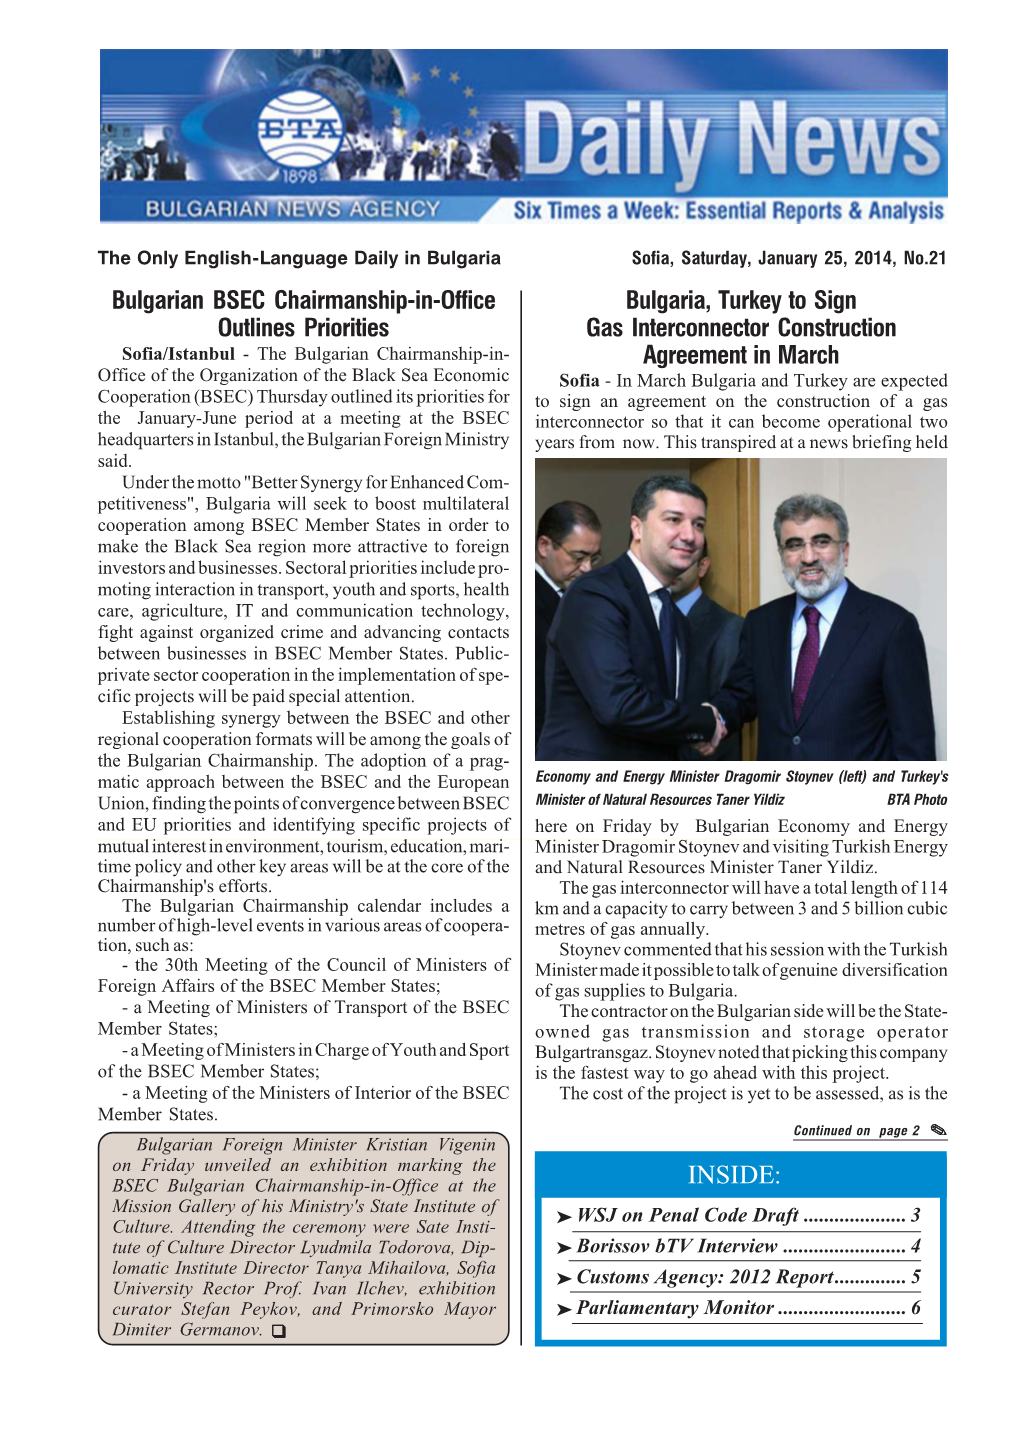 INSIDE: Bulgarian BSEC Chairmanship-In-Office Outlines